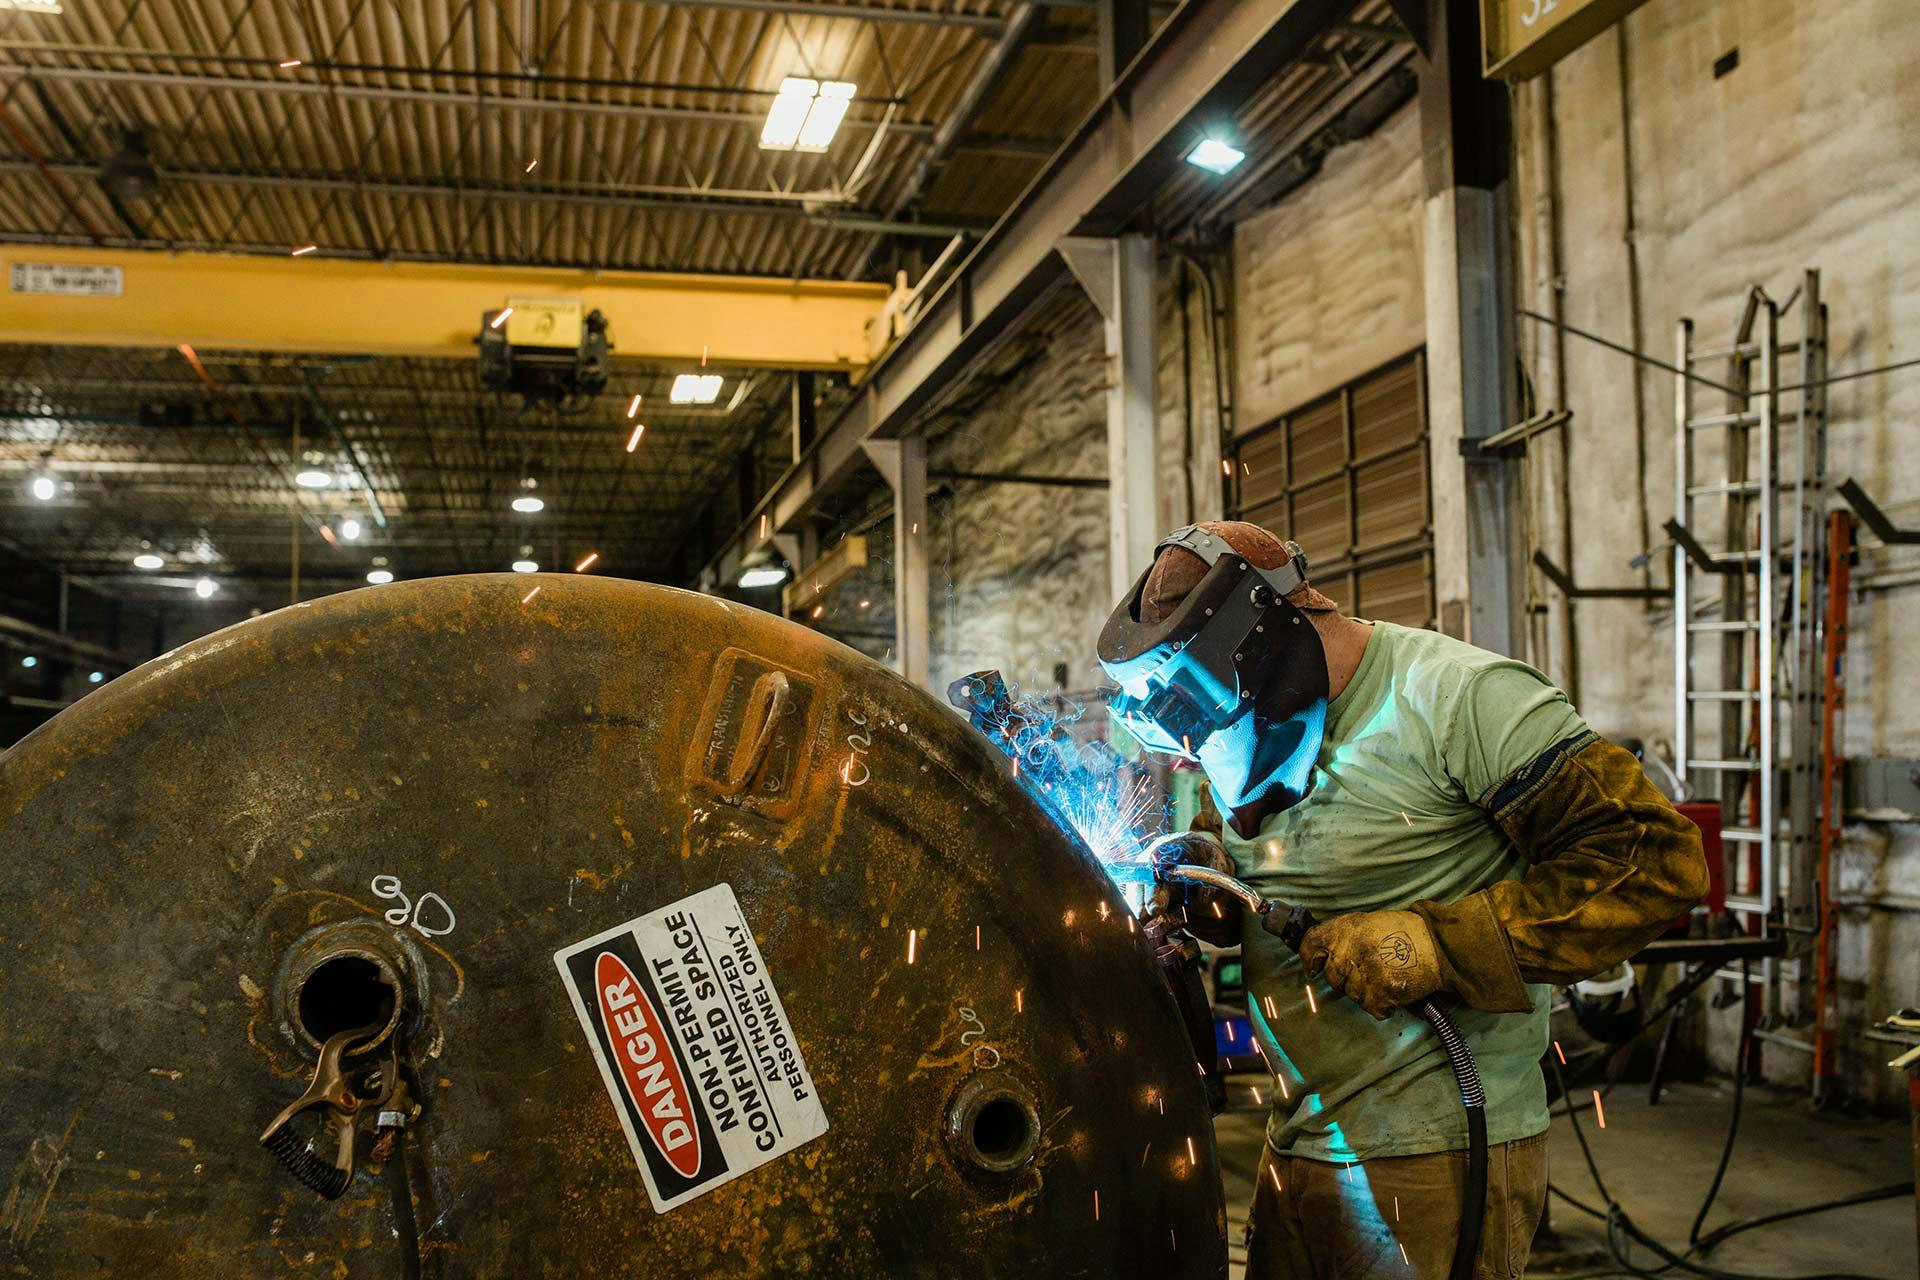 Image of a man welding a piece of equipment from the side